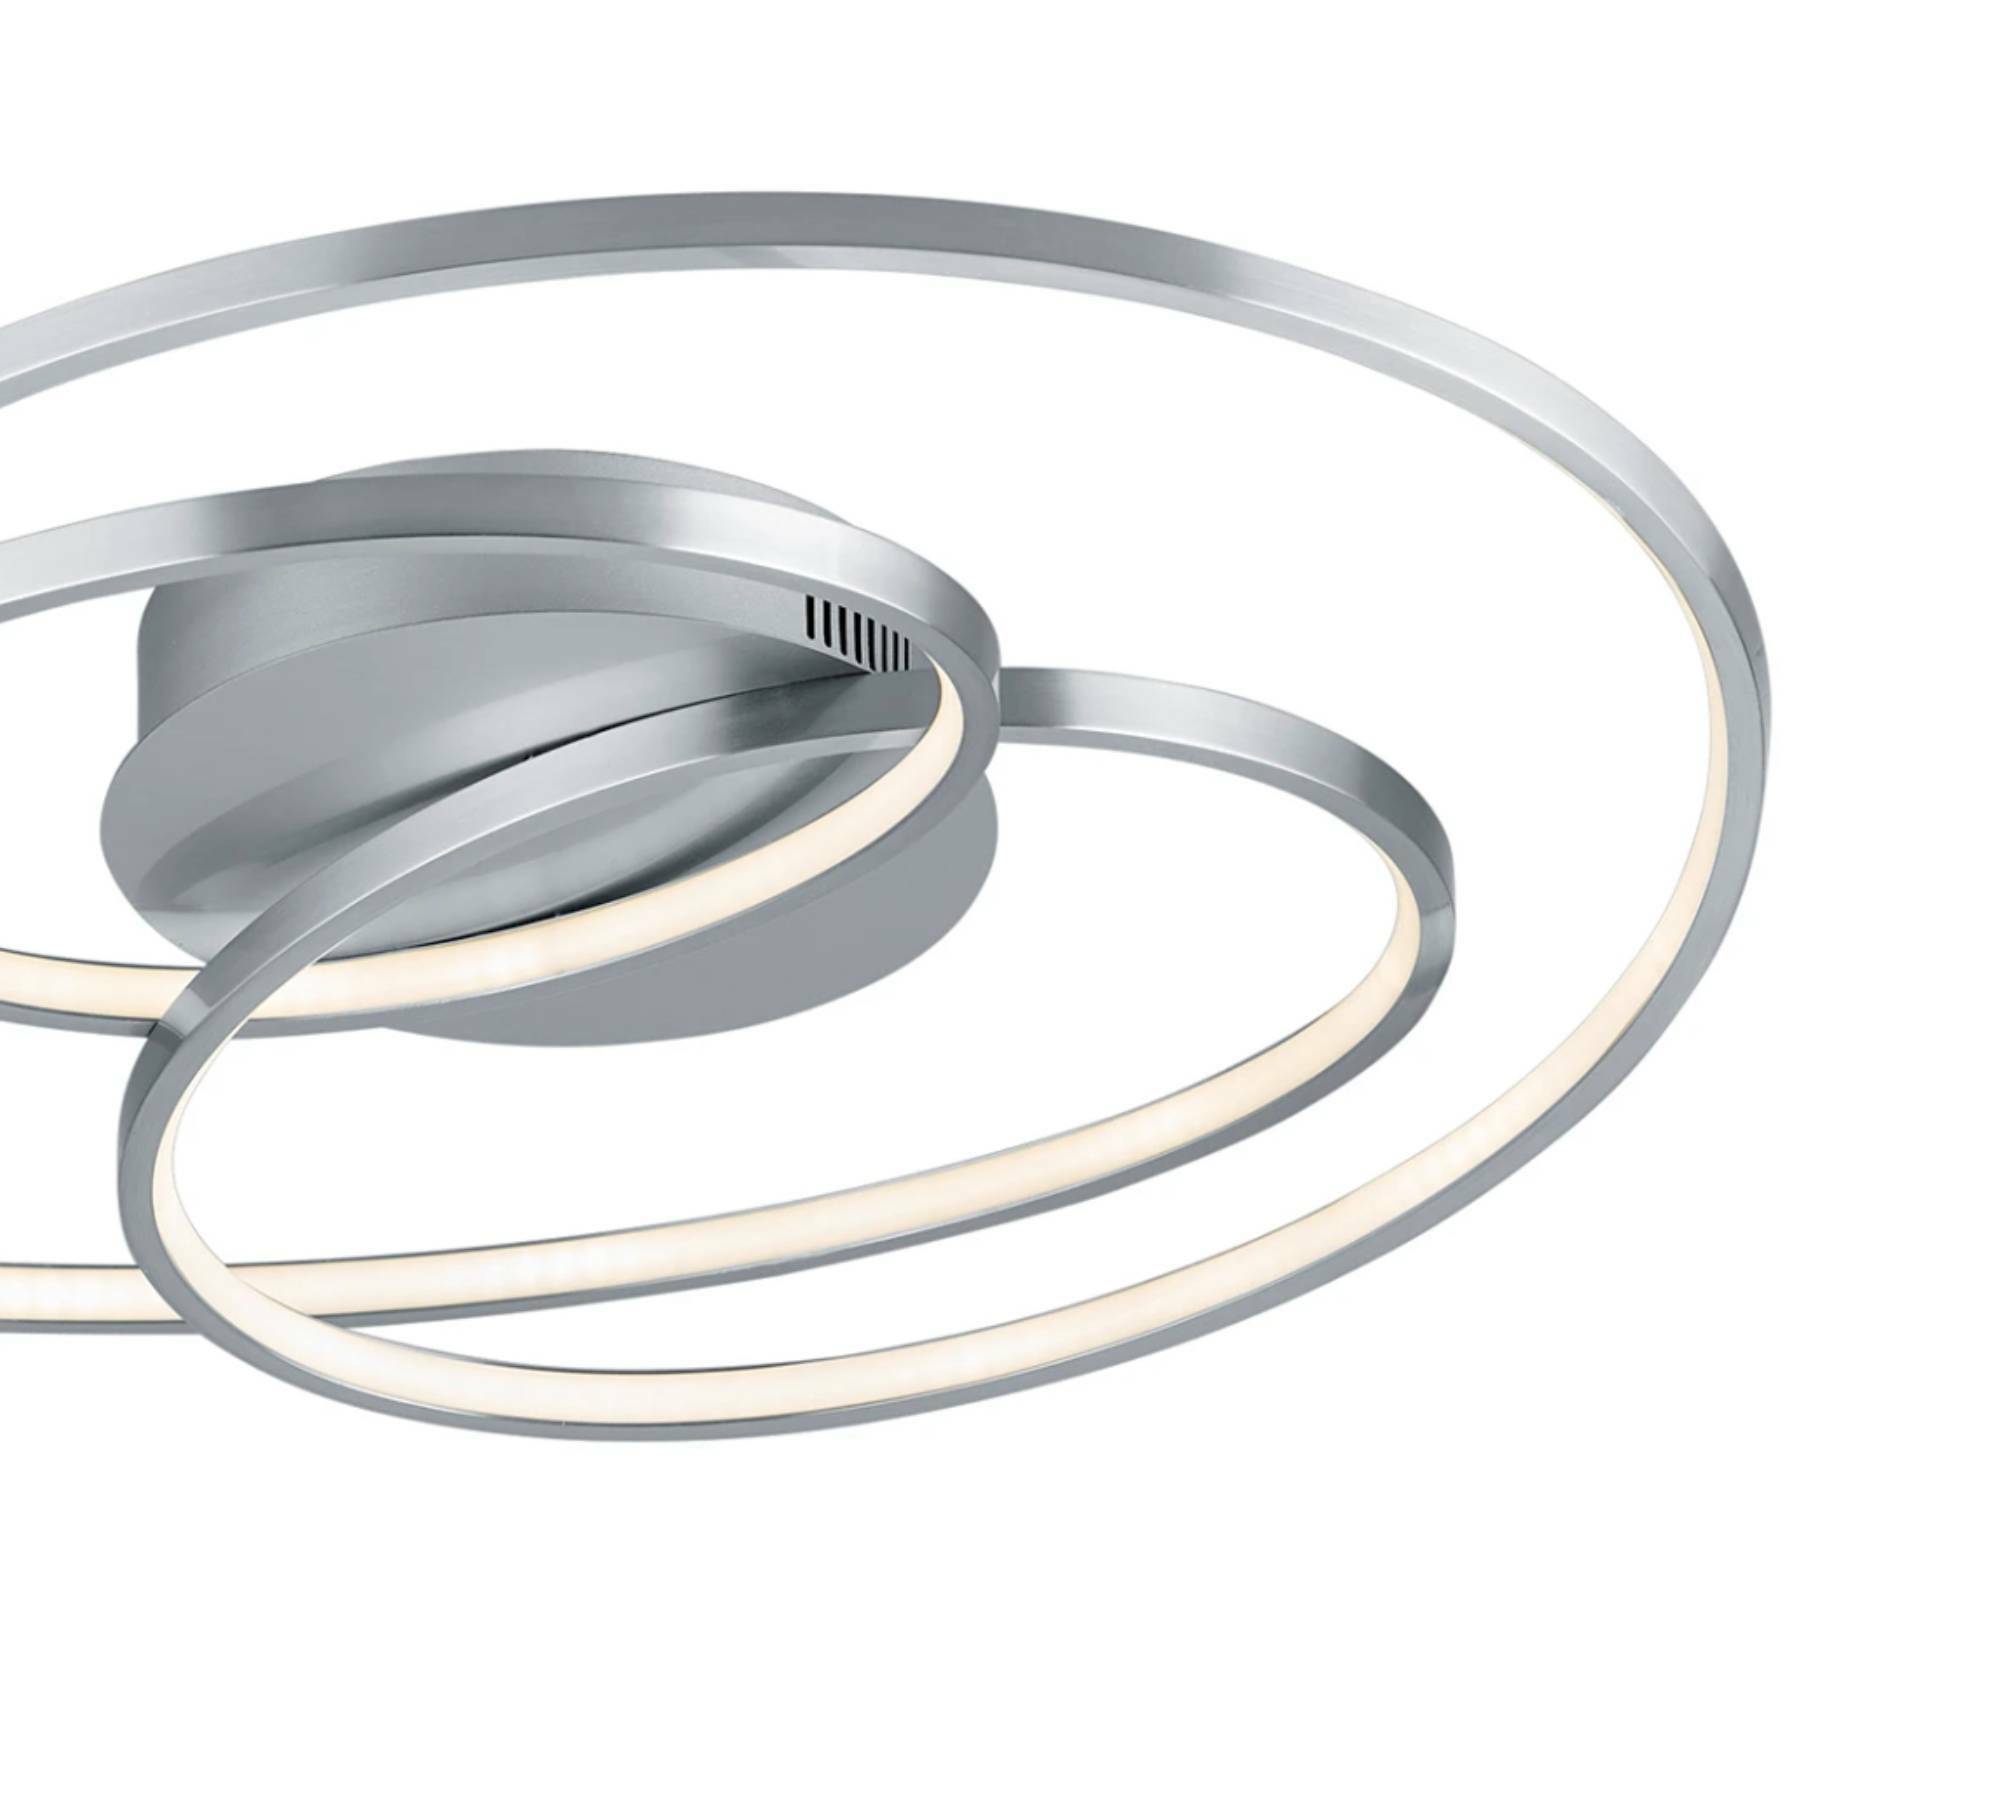 1-Flammige LED-Deckenleuchte Silber Oval 1